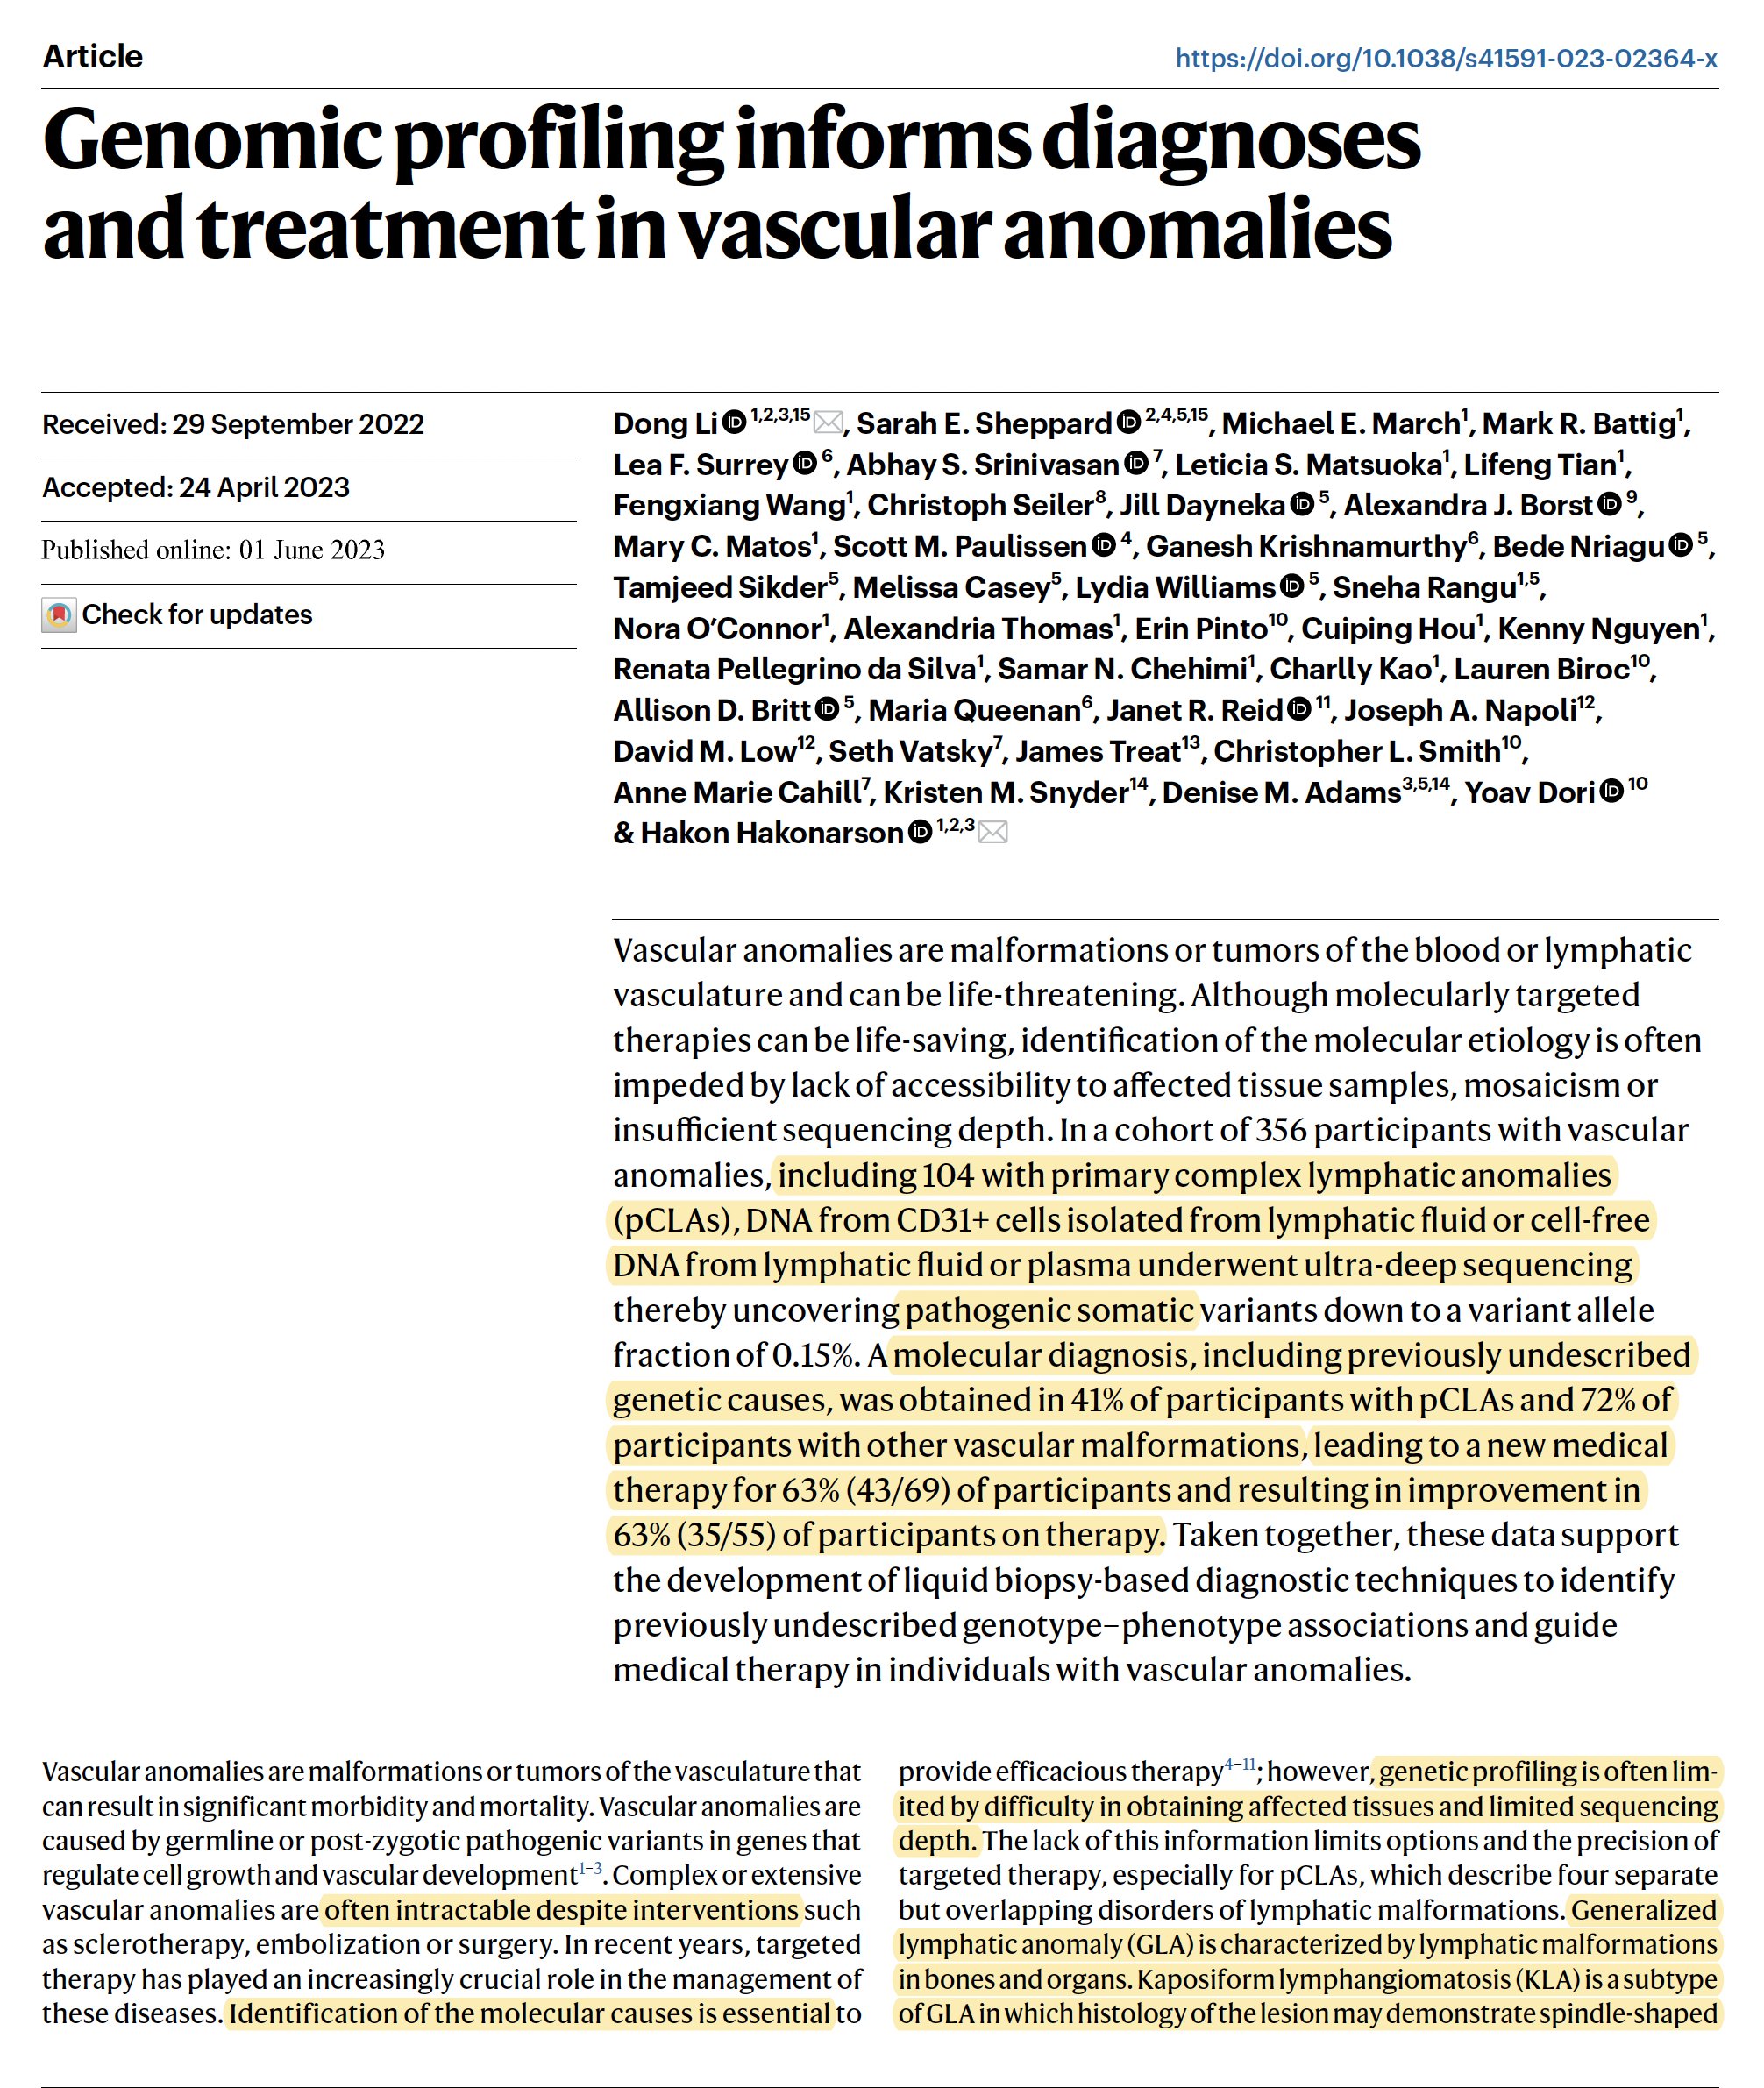 Genomic profiling informs diagnoses and treatment in vascular anomalies